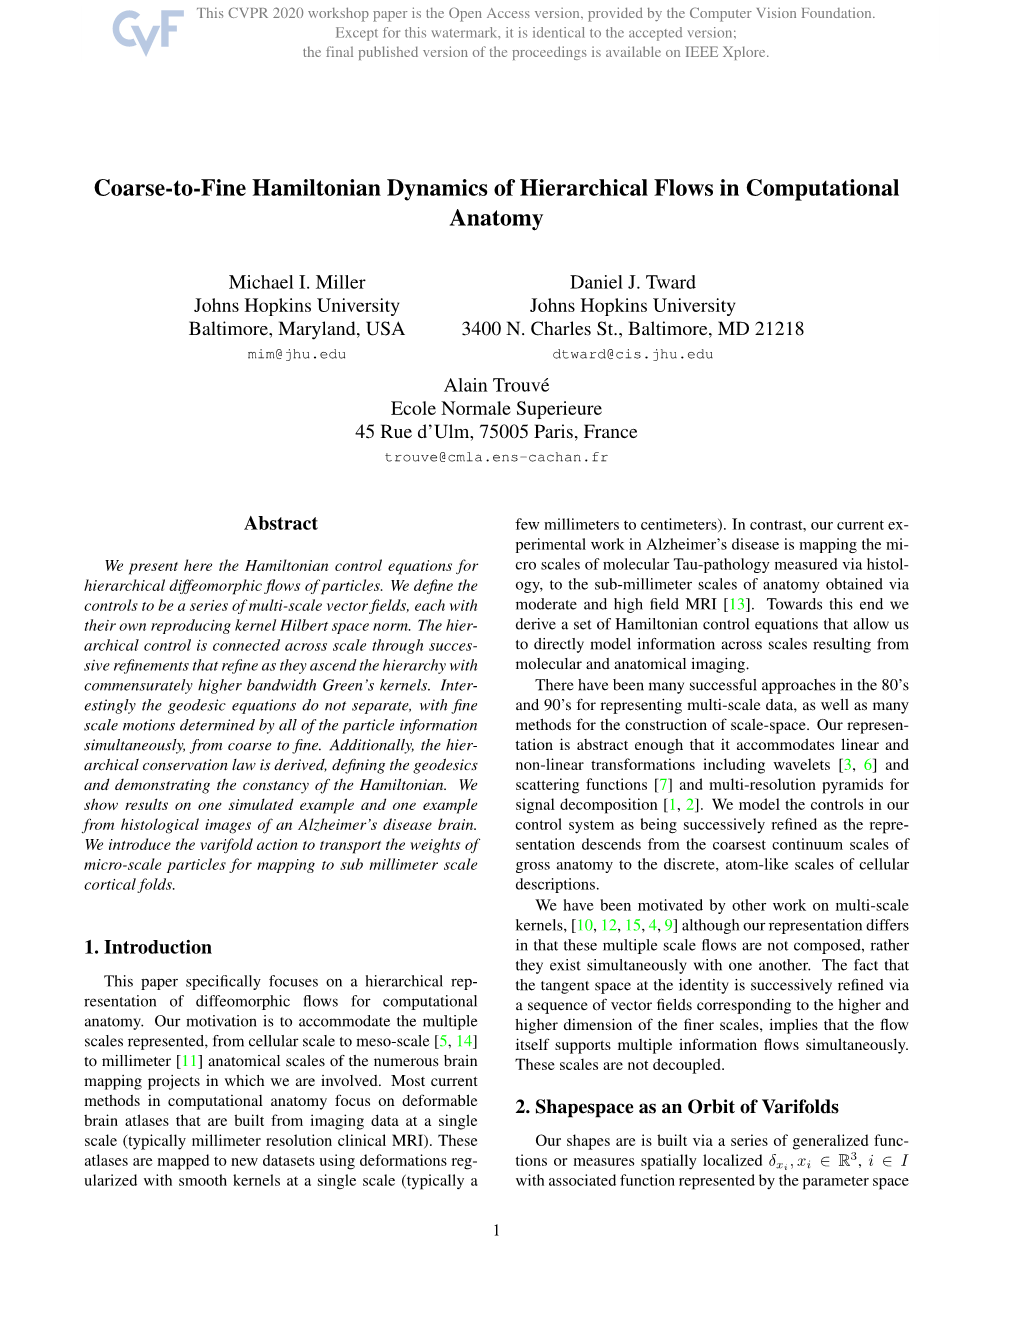 Coarse-To-Fine Hamiltonian Dynamics of Hierarchical Flows in Computational Anatomy